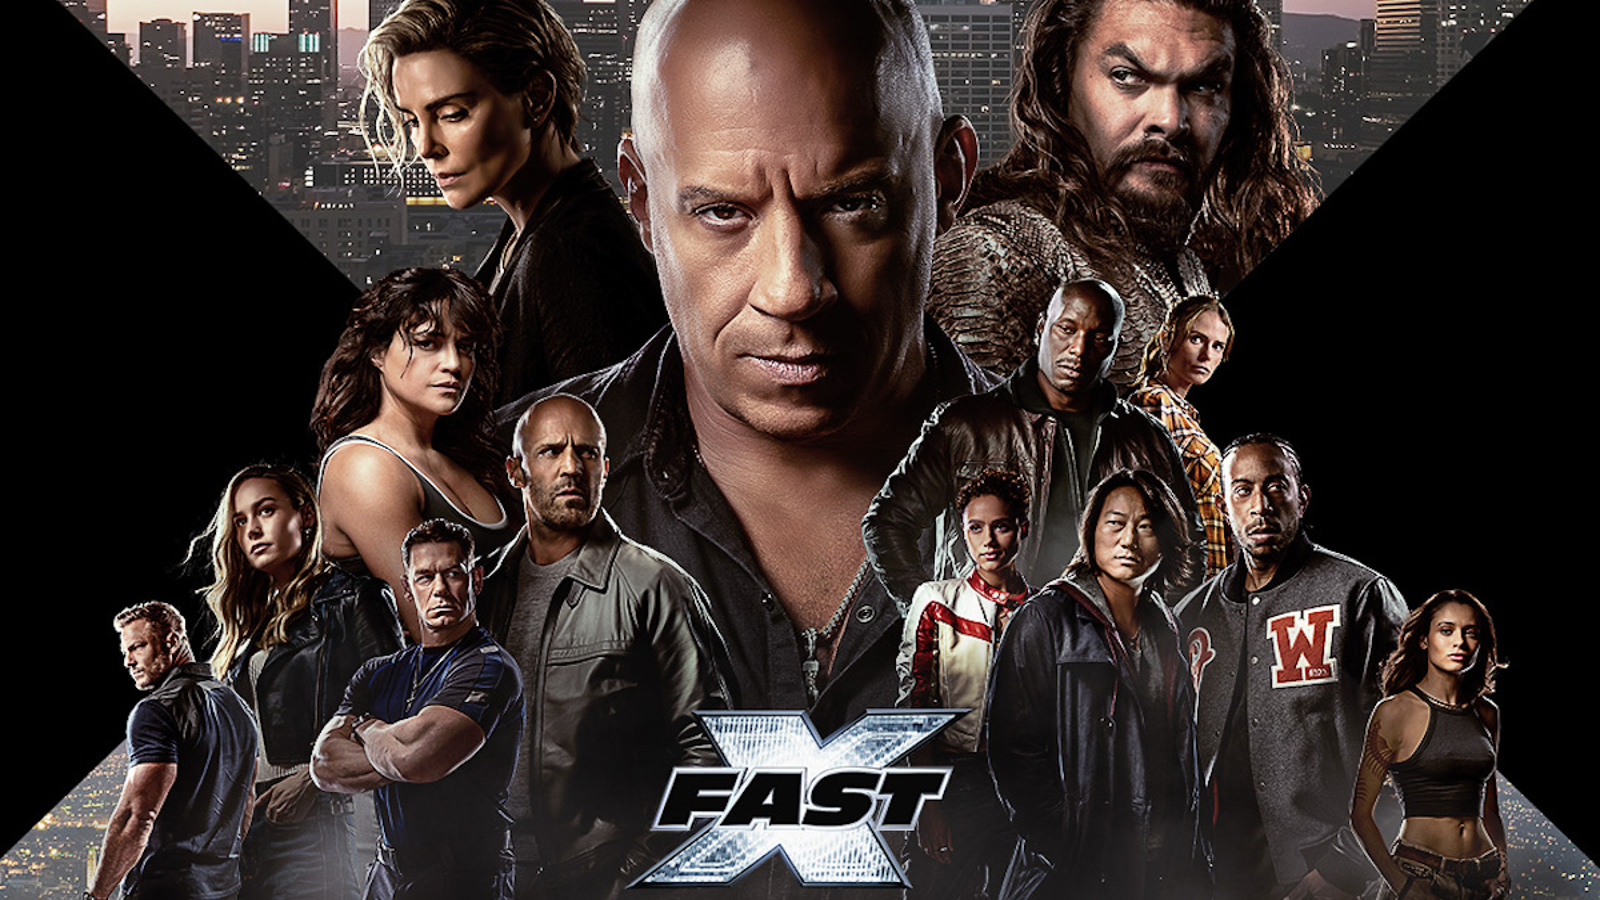 When Will Fast & Furious 10 Start Streaming?